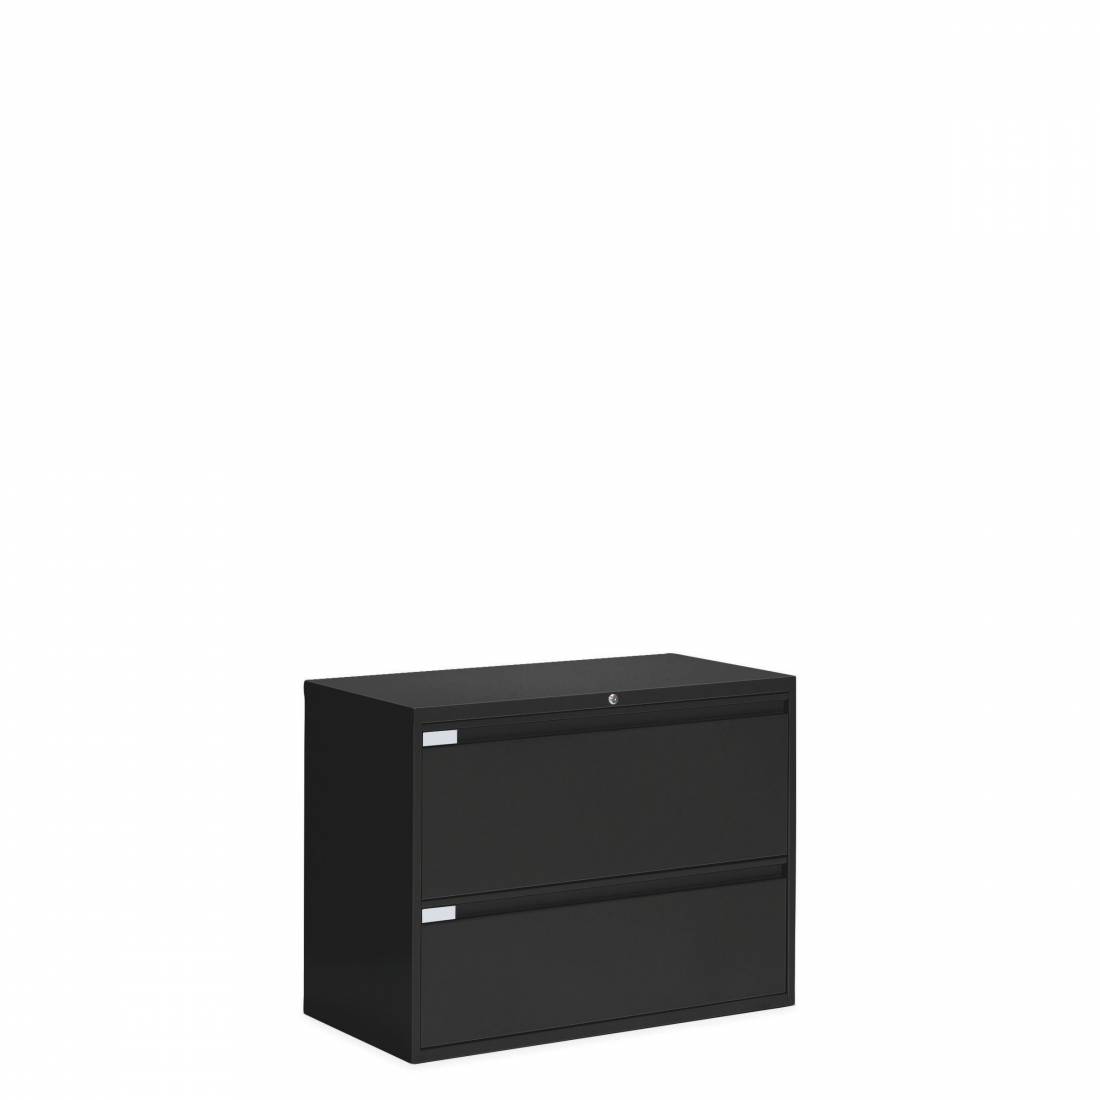 36”W 2 Drawer Lateral File